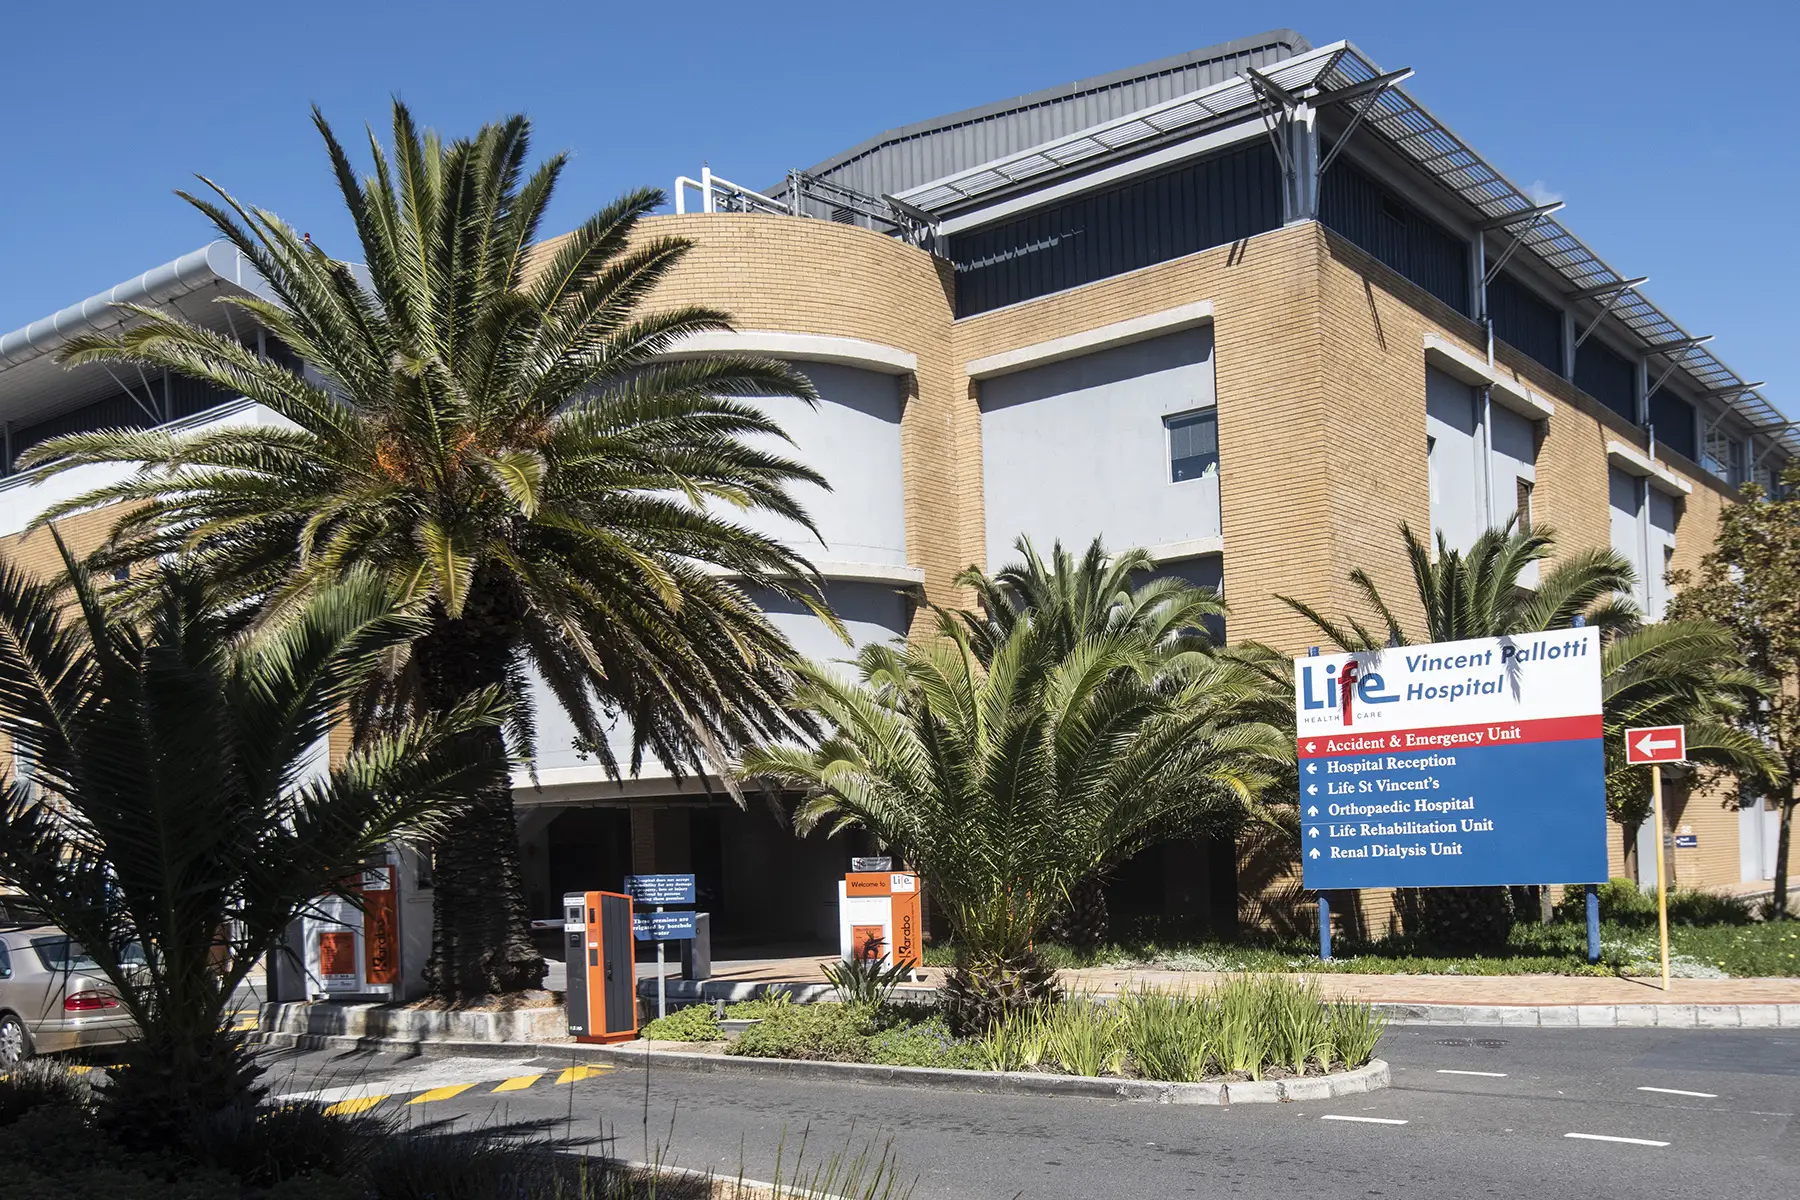 Life Vincent Pallotti Hospital in Cape Town